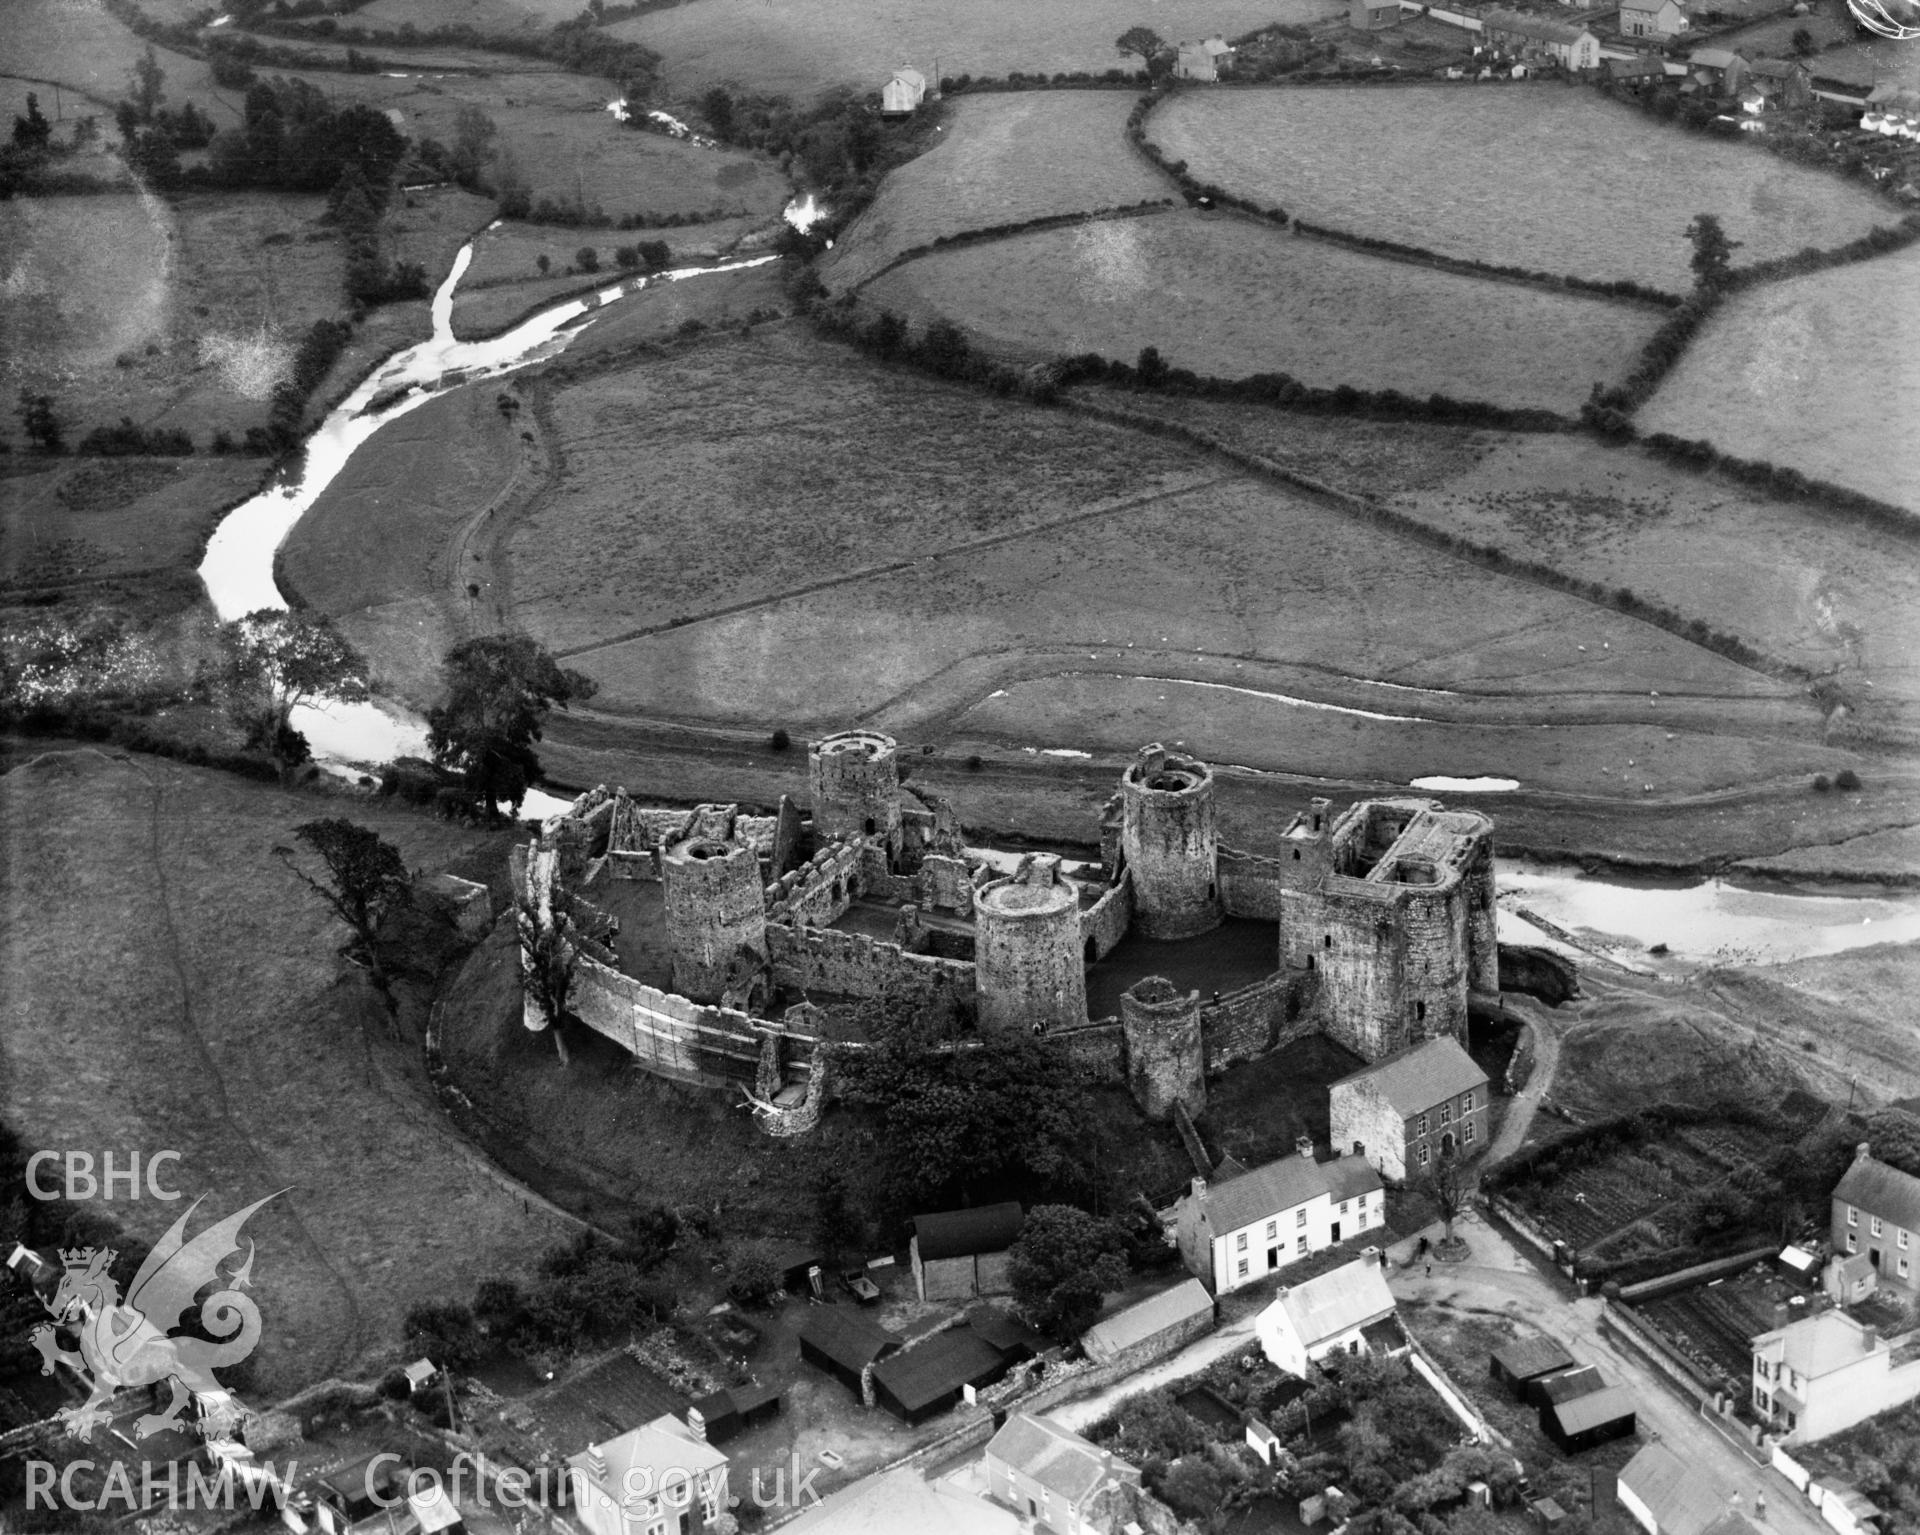 View of Kidwelly Castle showing nearby buildings, oblique aerial view. 5?x4? black and white glass plate negative.